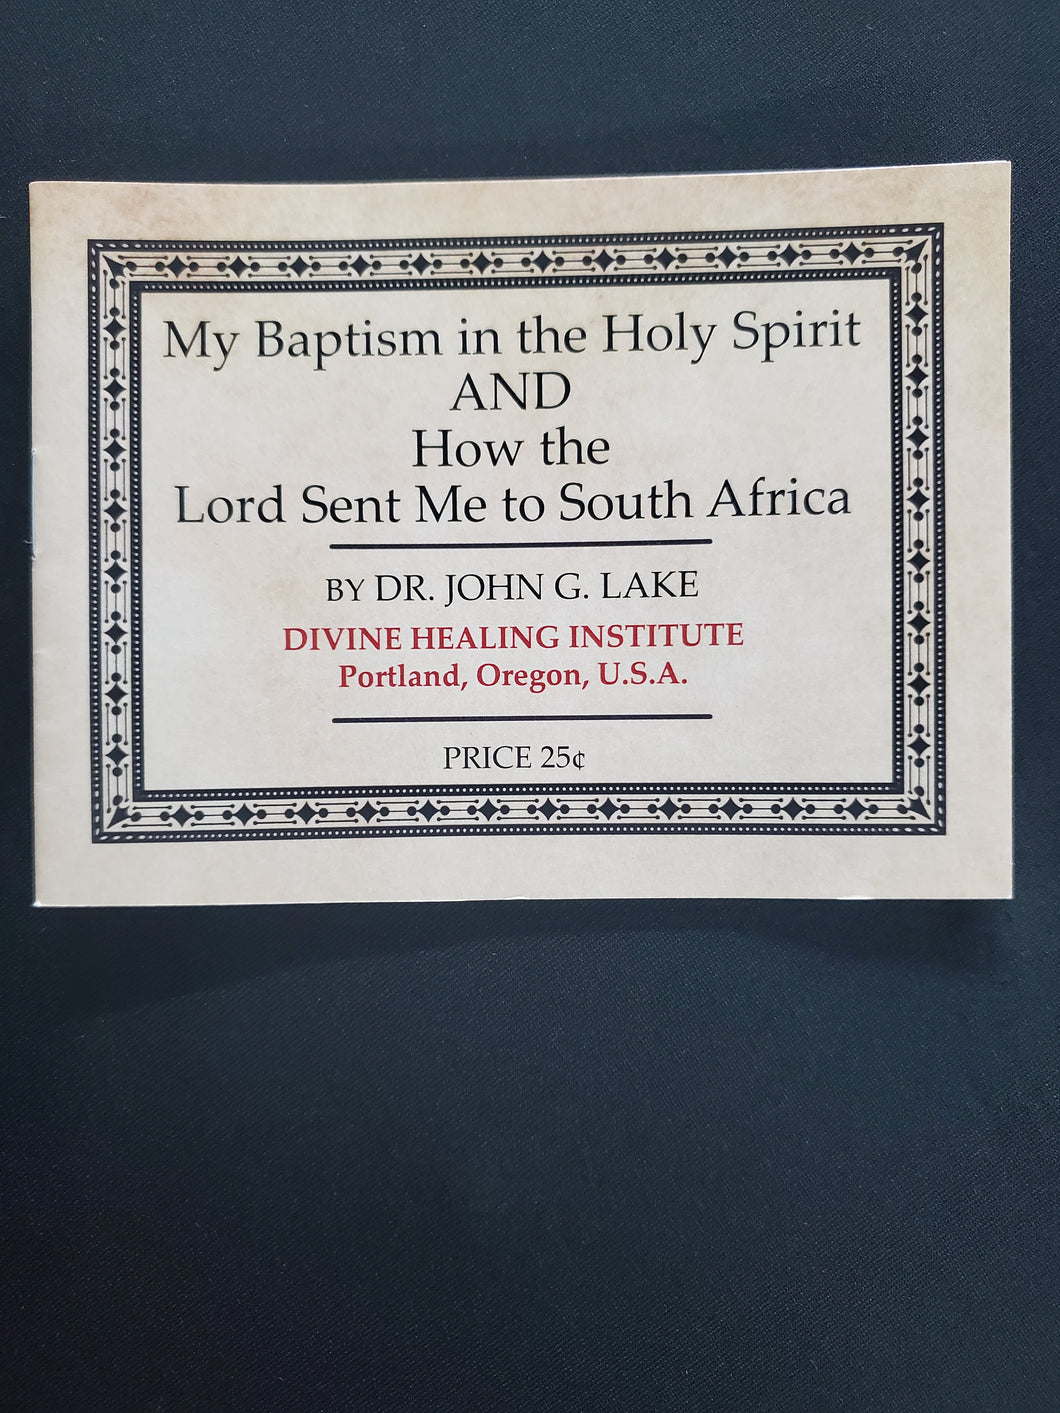 My Baptism in the Holy Spirit AND How the Lord Sent Me to South Africa